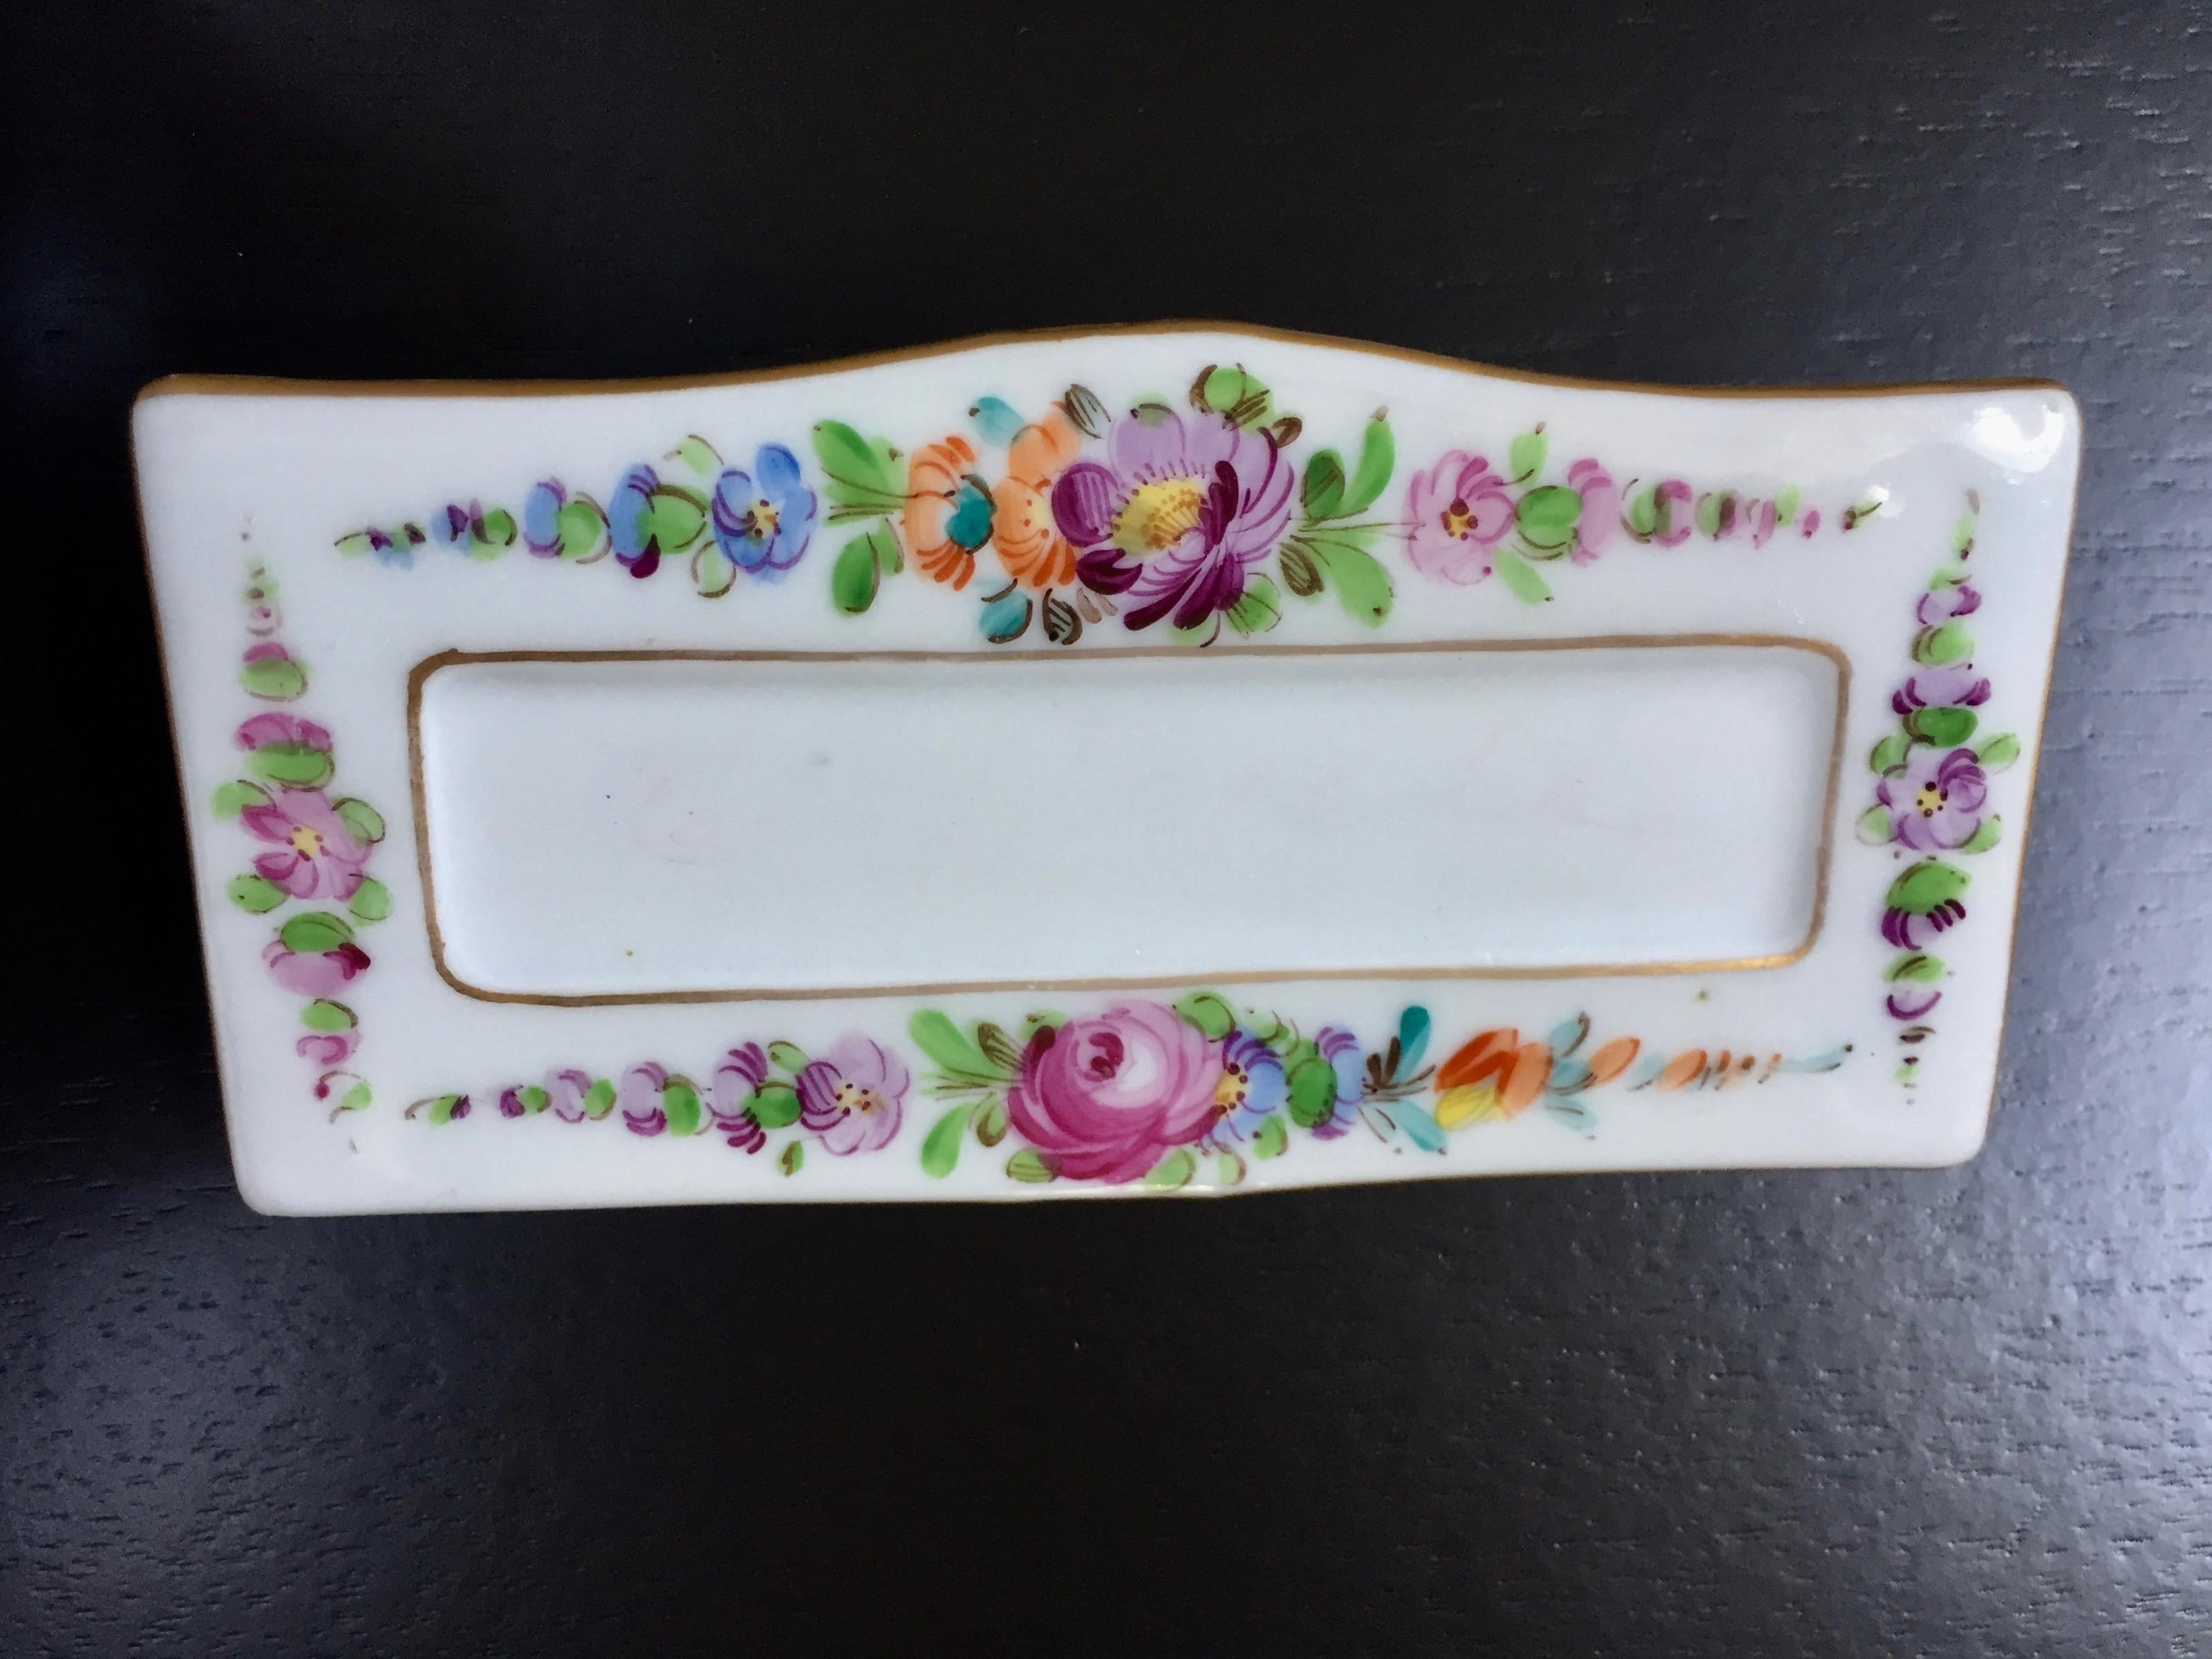 Set of 12 porcelain Dresden place card holders. With hand-painted flowers and gold trim.